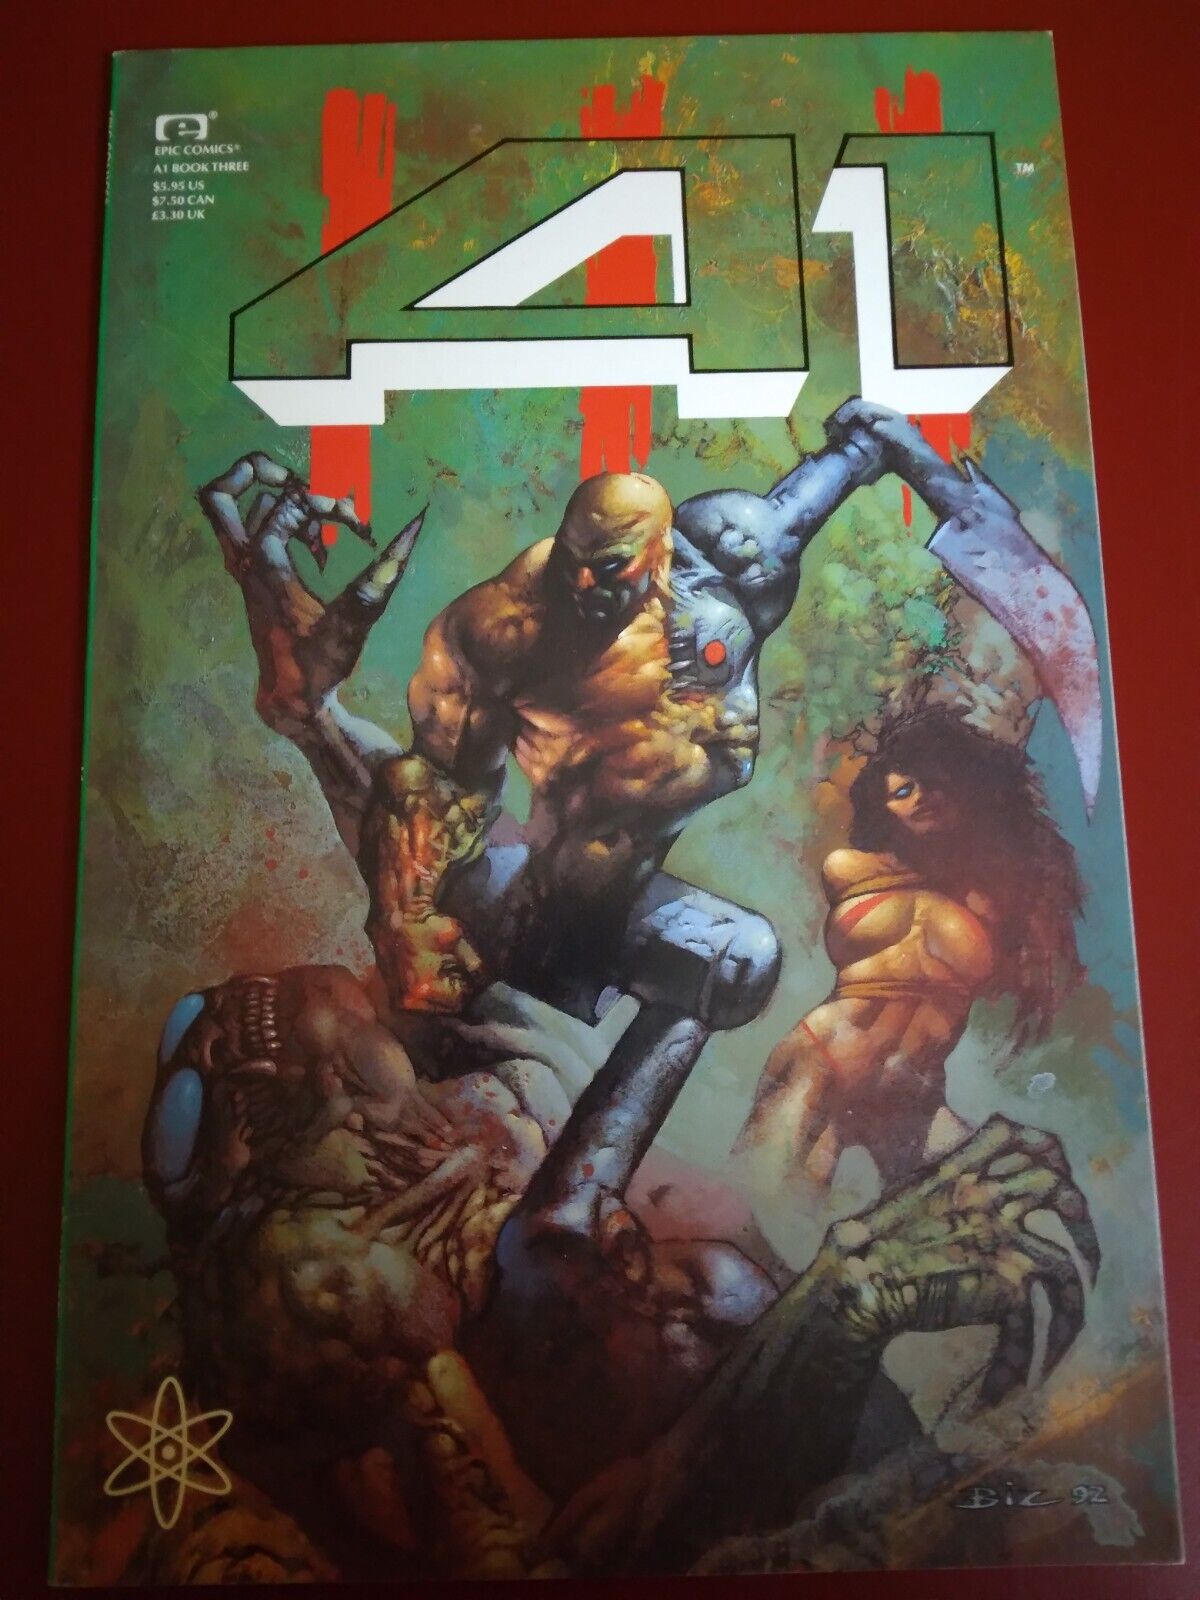 A1 BOOK THREE #3 GRAPHIC NOVEL (MARVEL/EPIC) 1992 - FN - Simon Bisley Cover